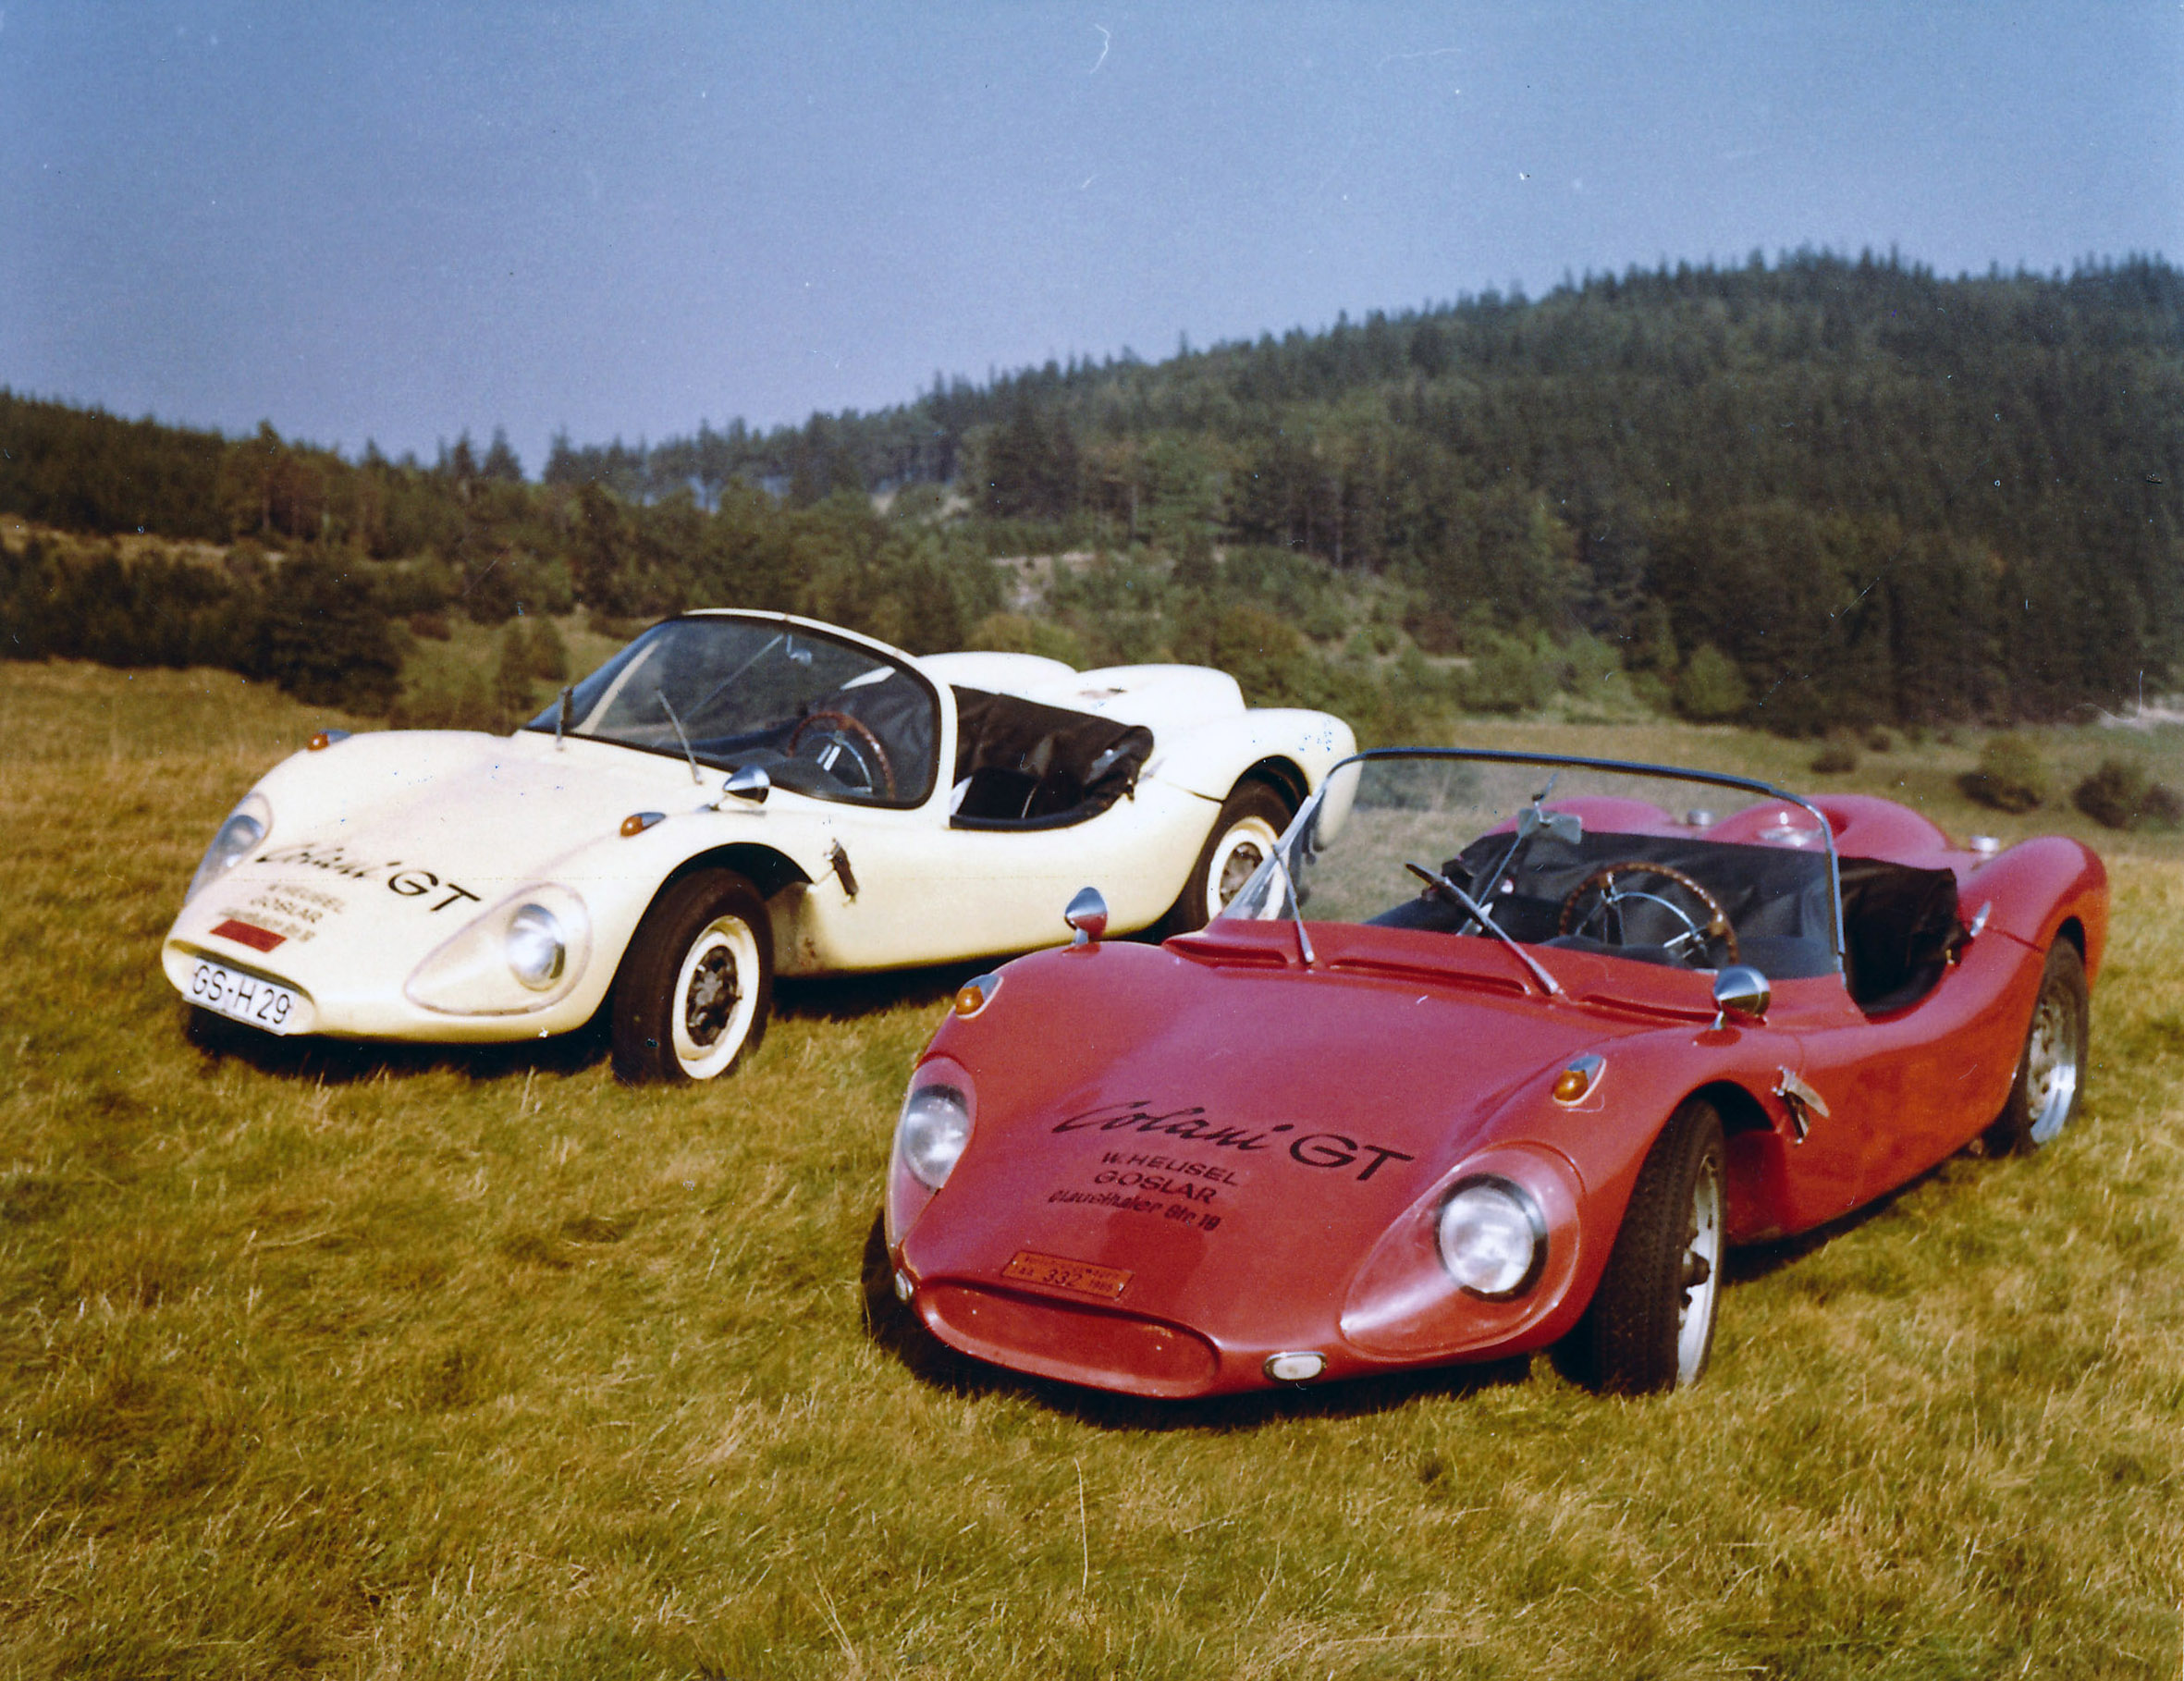 Two Colani GT Spider based on Volkswagen 1200, 1962–1967